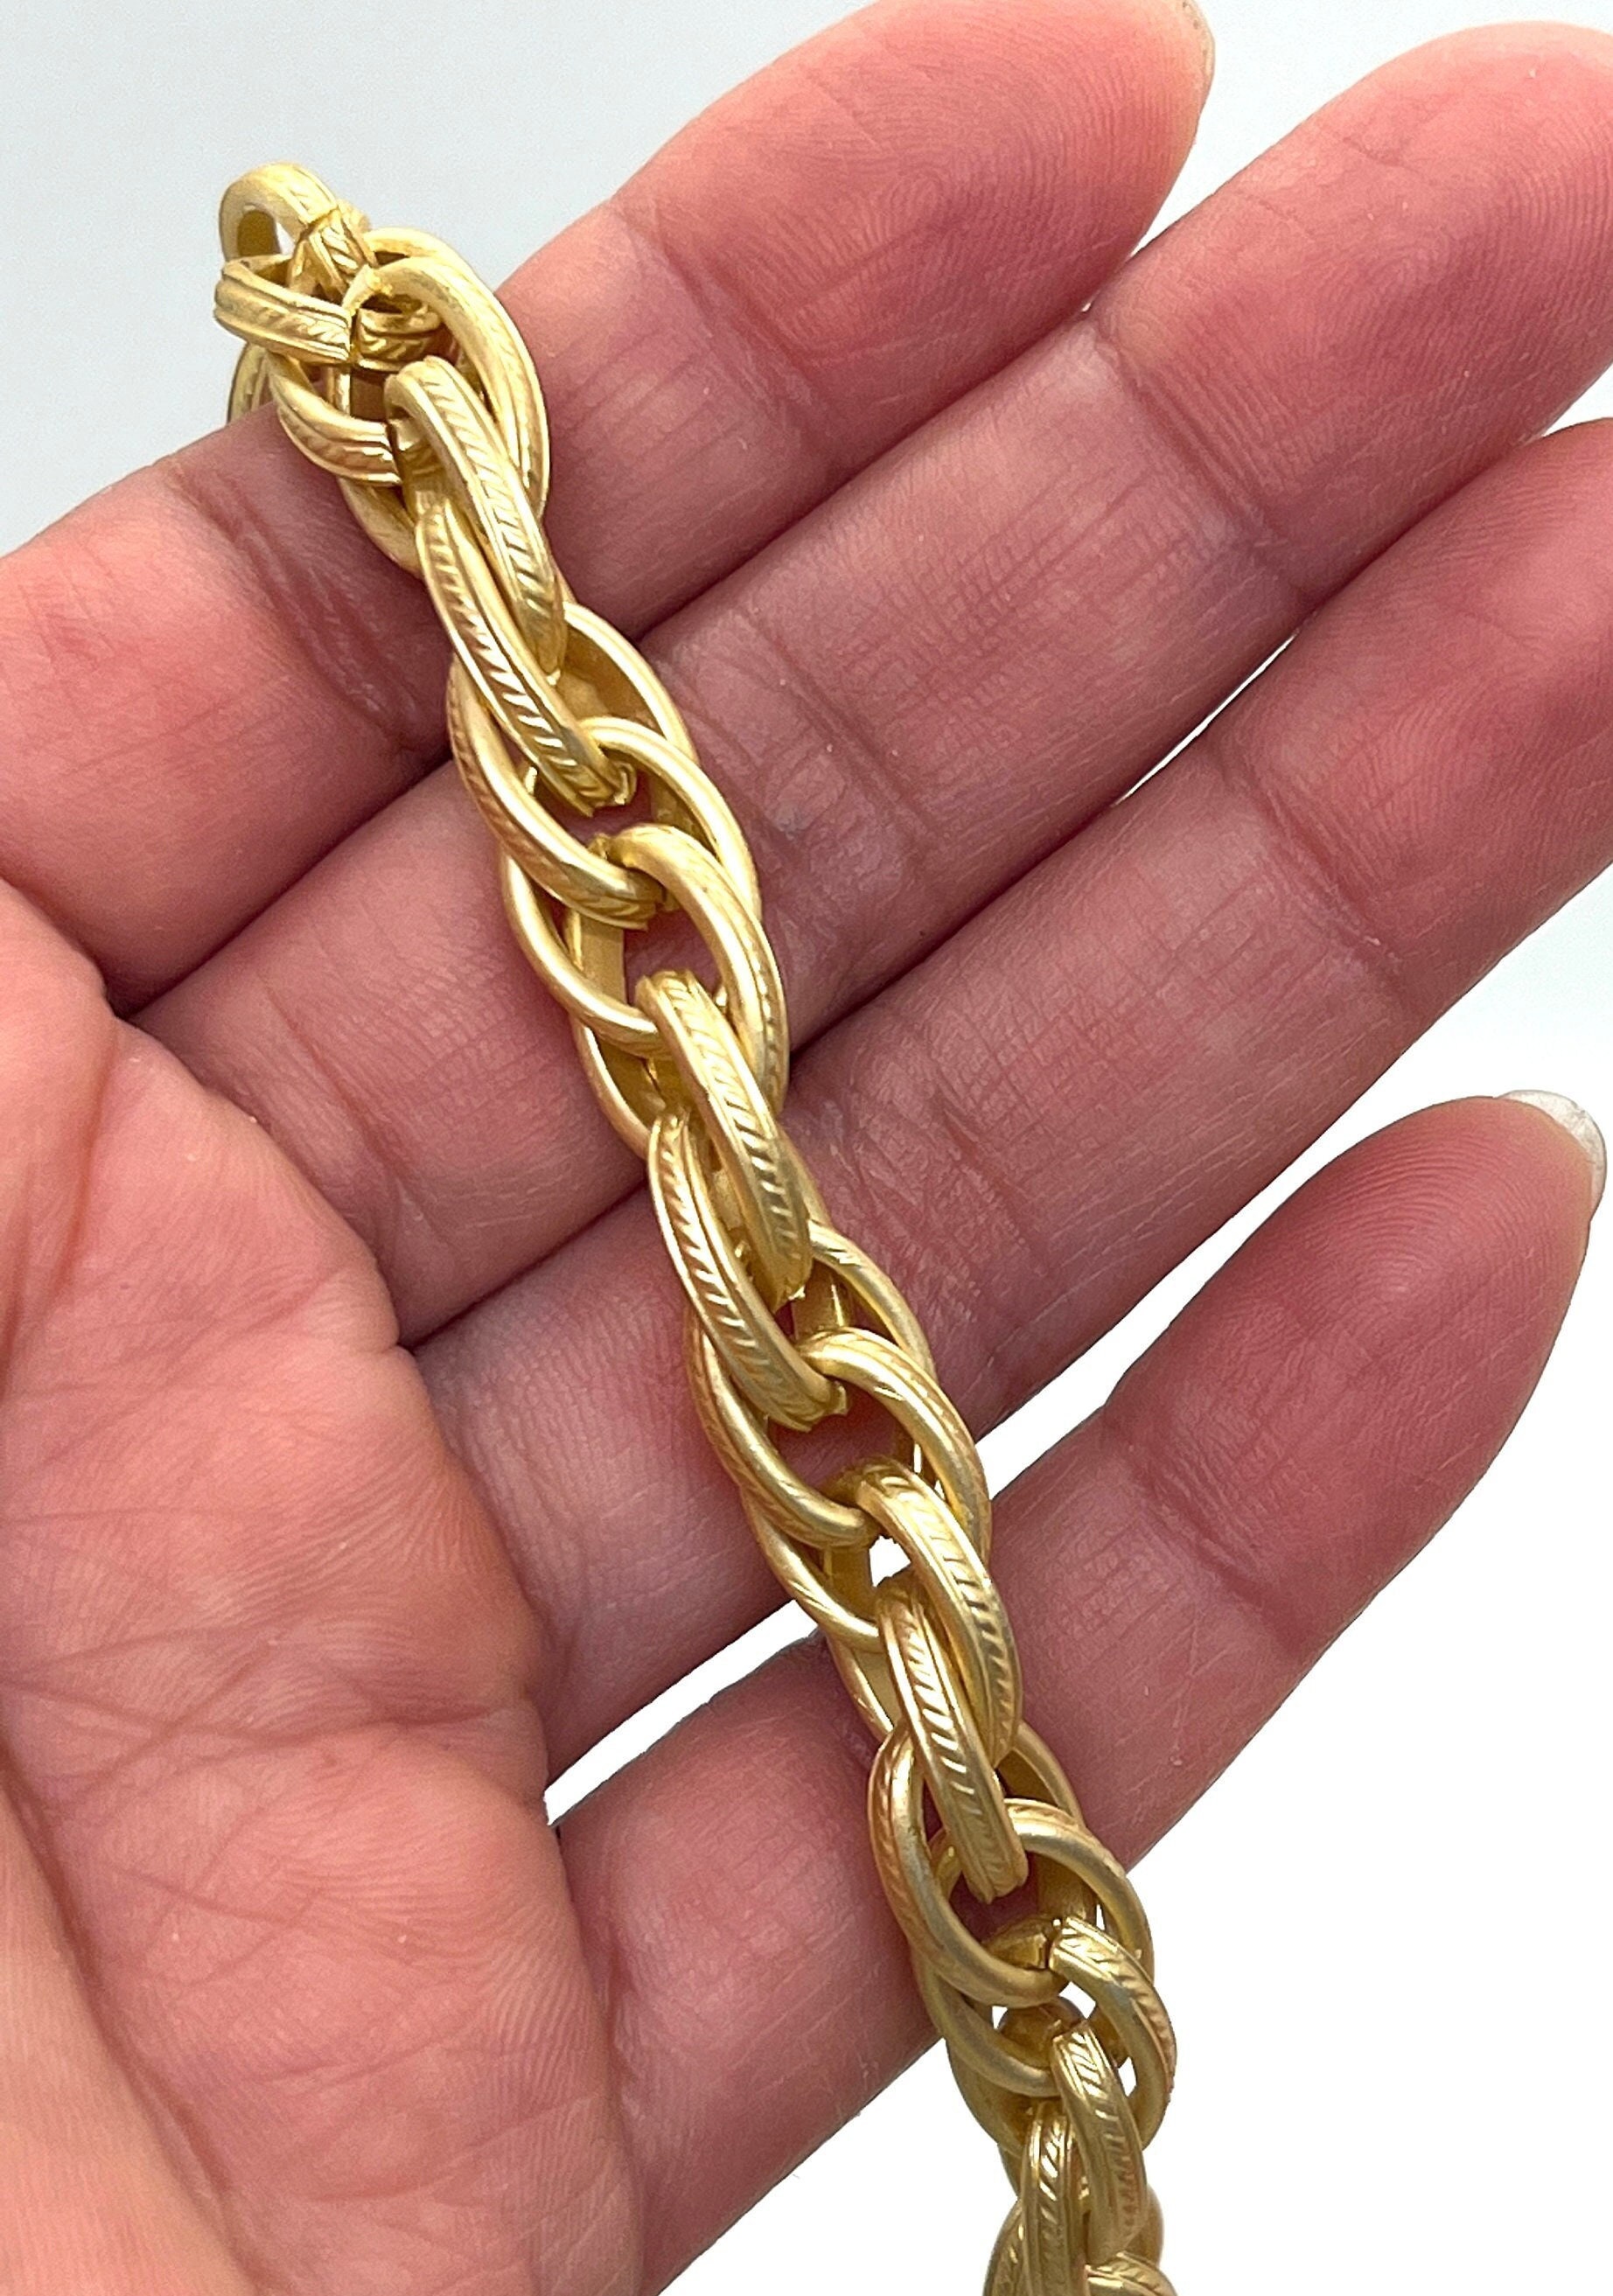 5pcs Stainless Steel Chain Necklace, Wholesale 45cm Chains, Silver Chain,  Wholesale Stainless Steel Chain, Necklace Supplies, Gold, Silver 